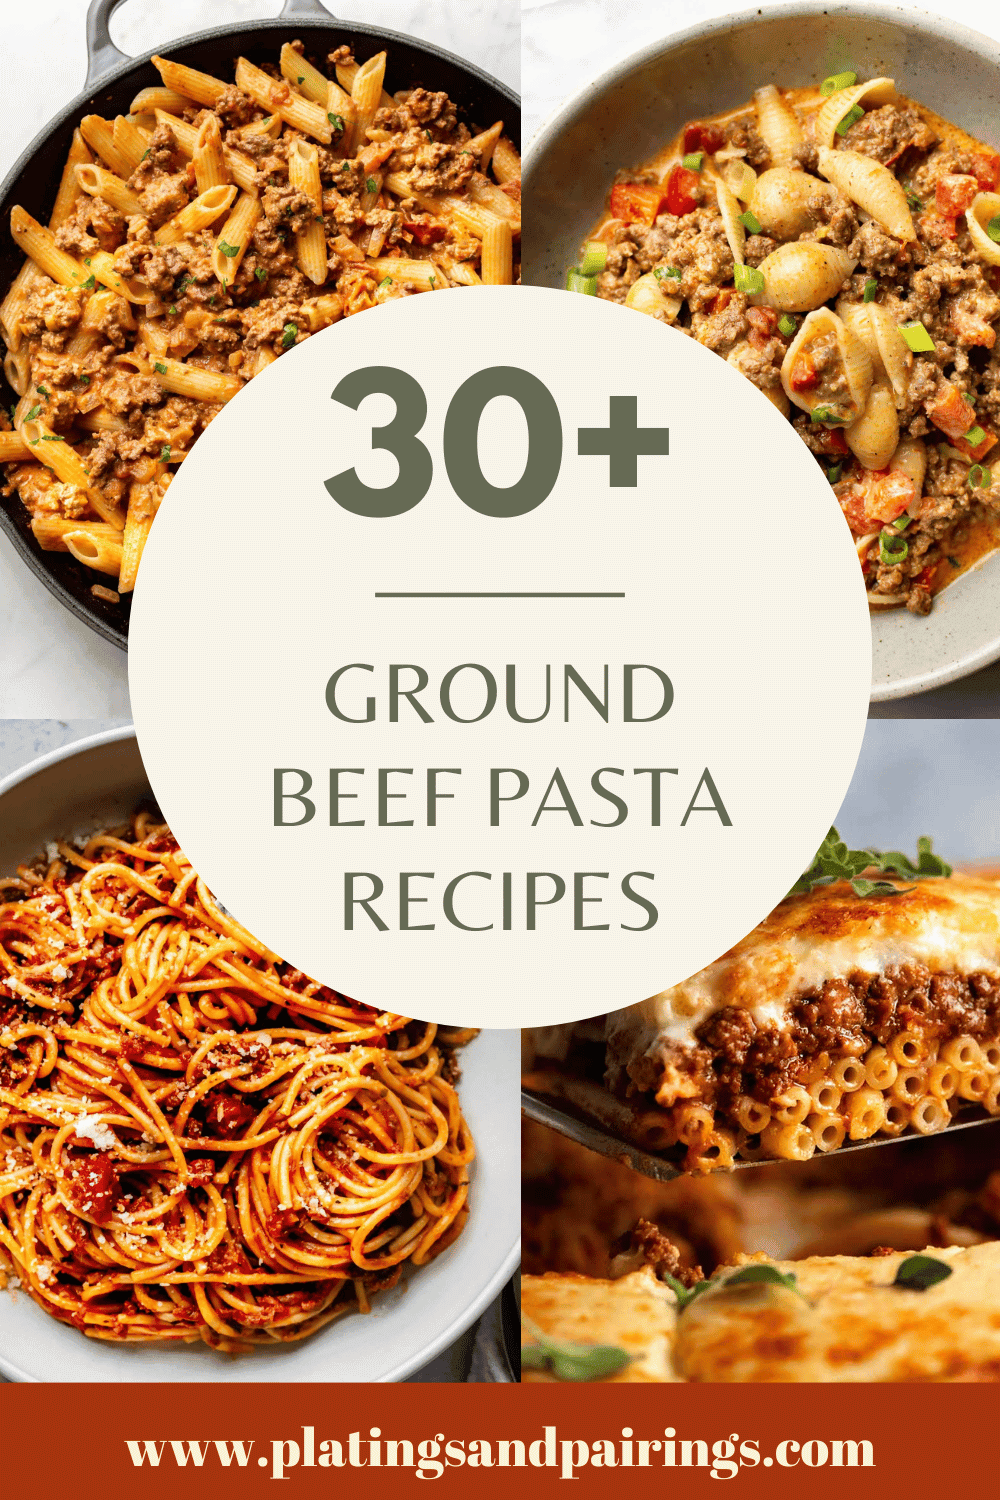 Collage of ground beef pasta recipes with text overlay.